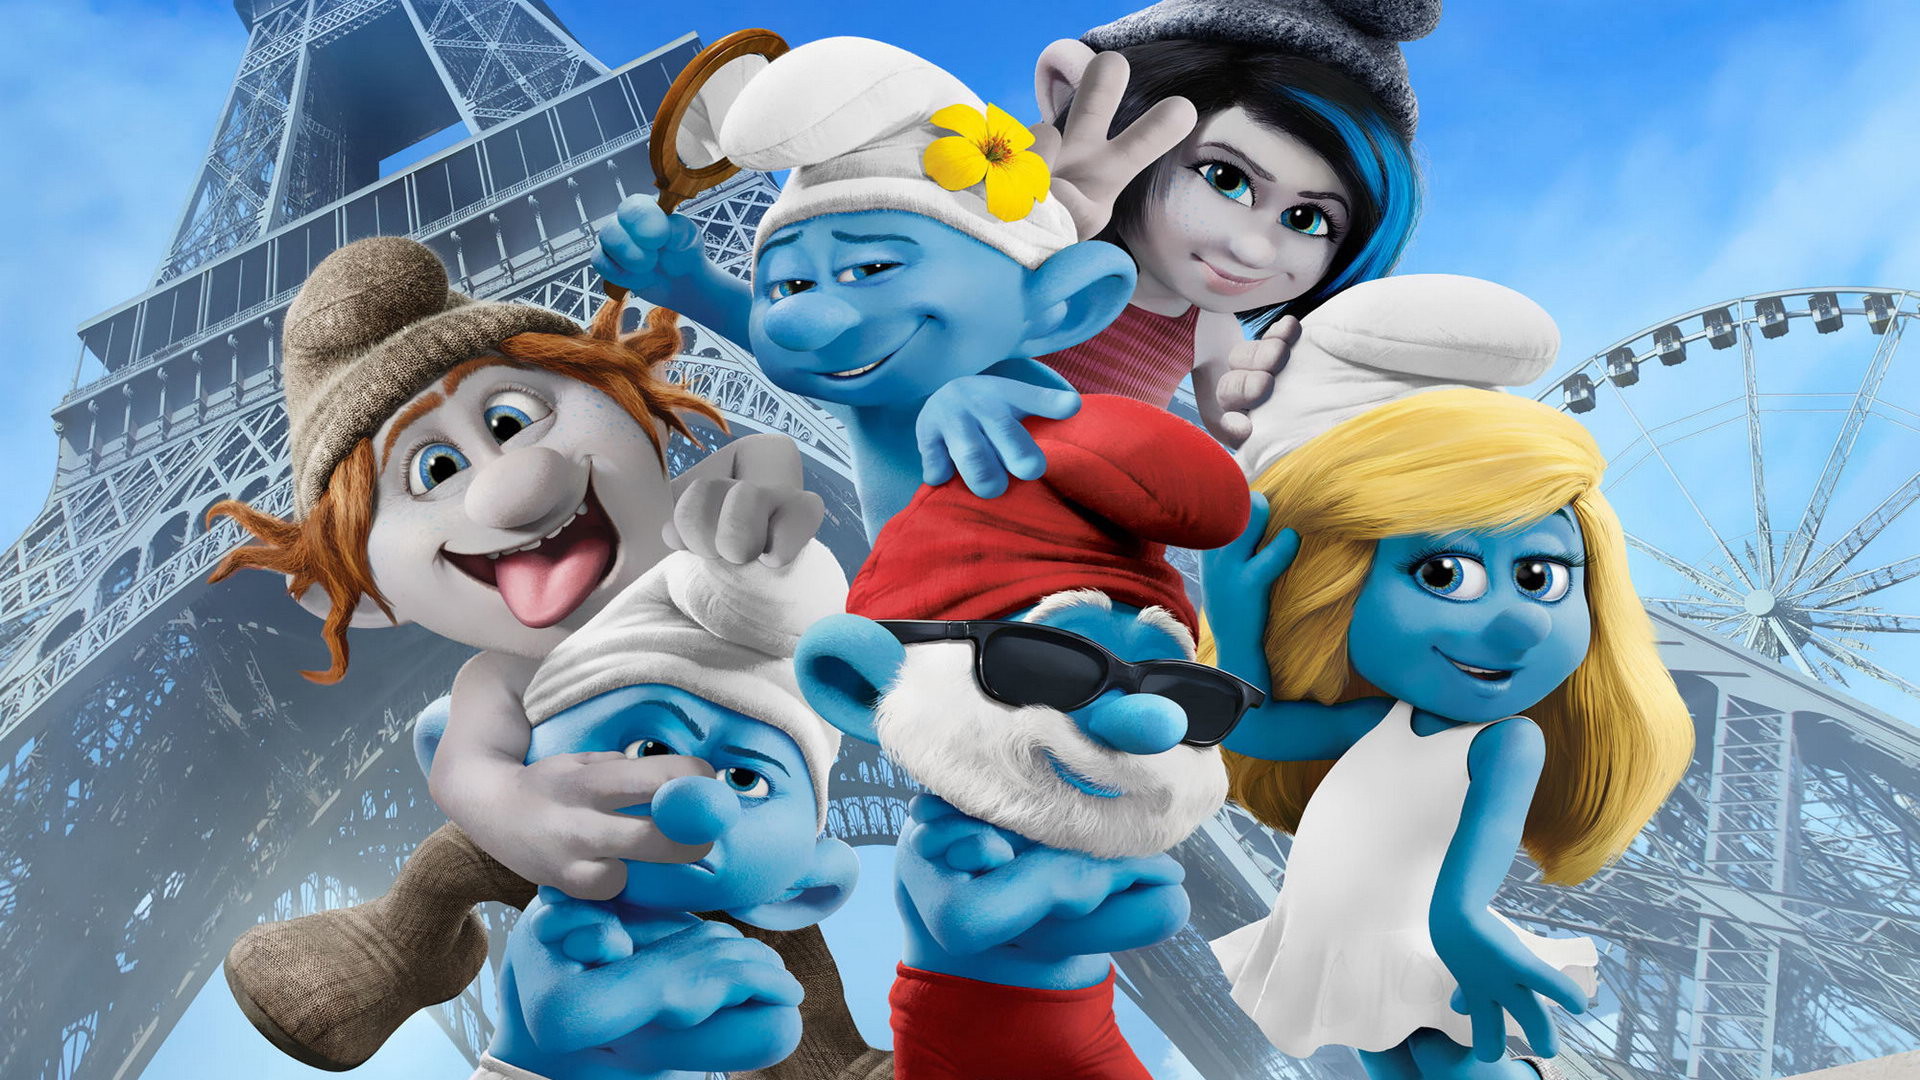 1920x1080 The Smurfs 2 Themes